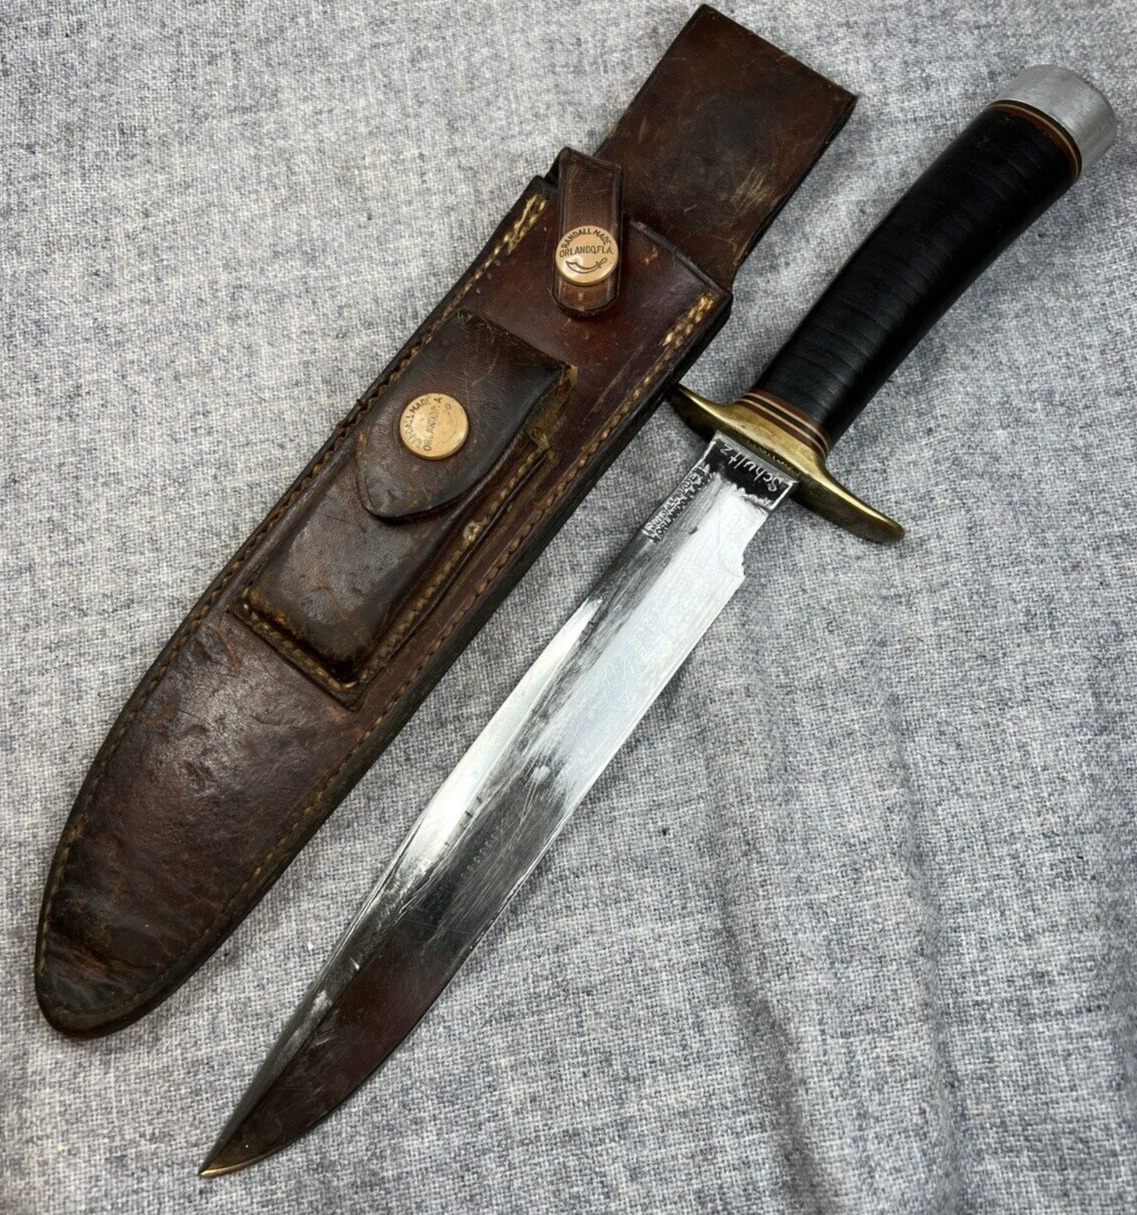 Older RANDALL 1-8 Fighting Knife - Stacked Leather Handle w/ Sheath and Stone